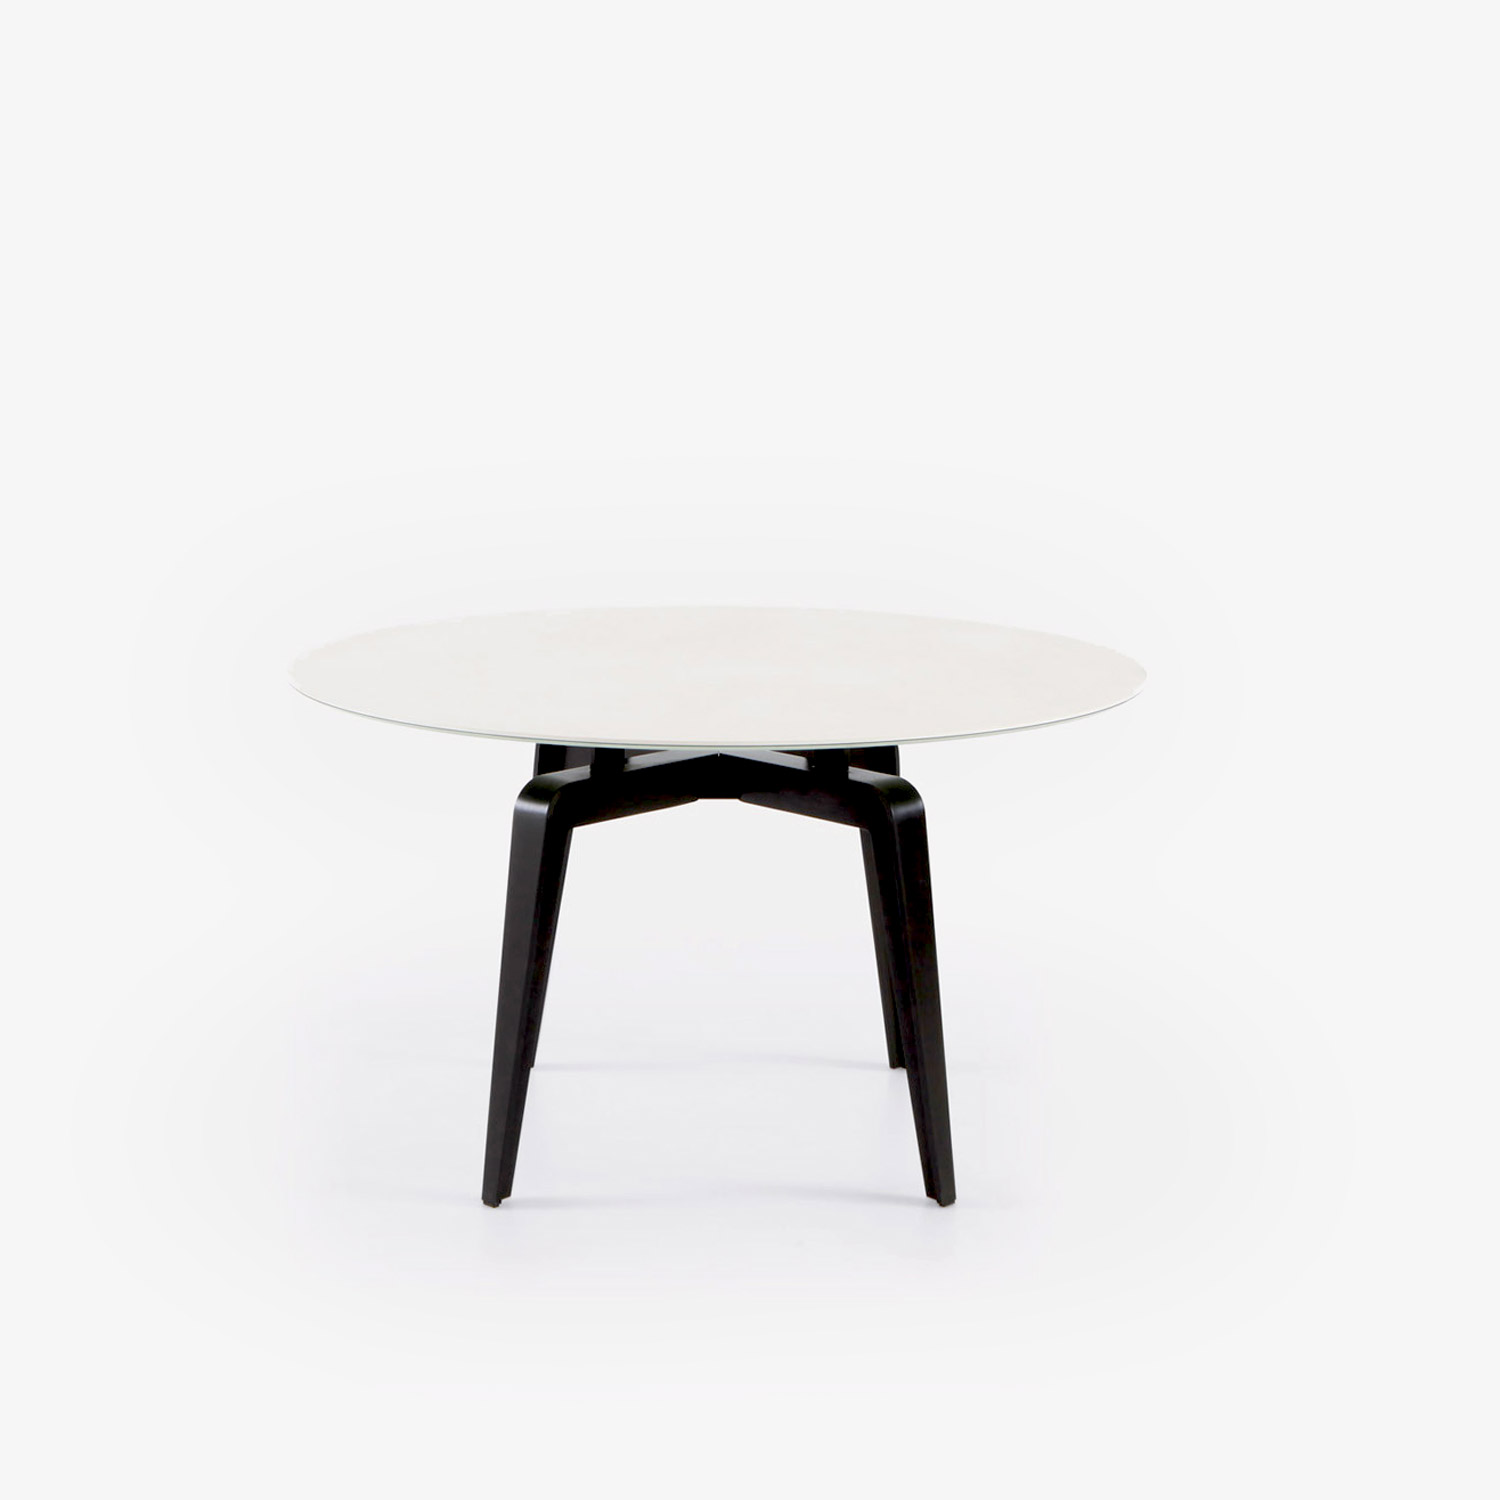 Image Round dining table black lacquered base  1